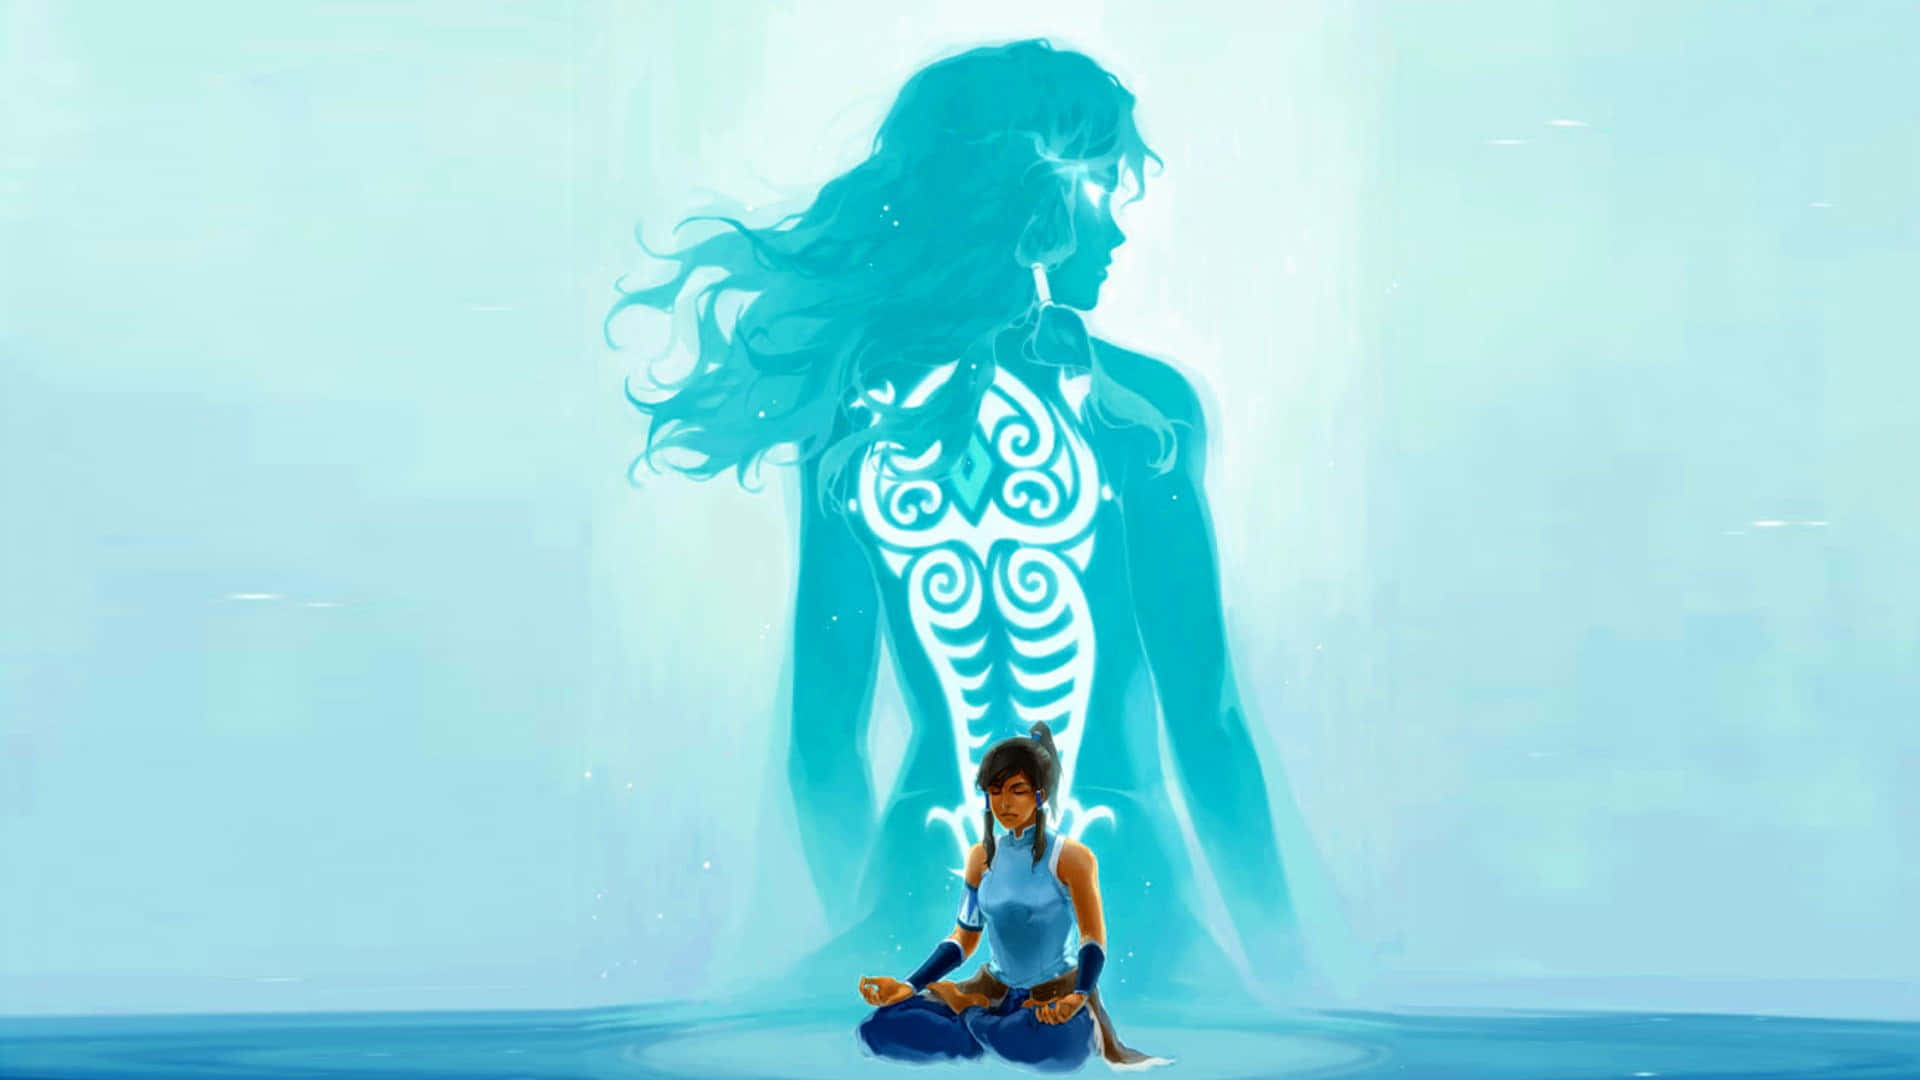 Korra Brings Balance To The World In The Legend Of Korra Background